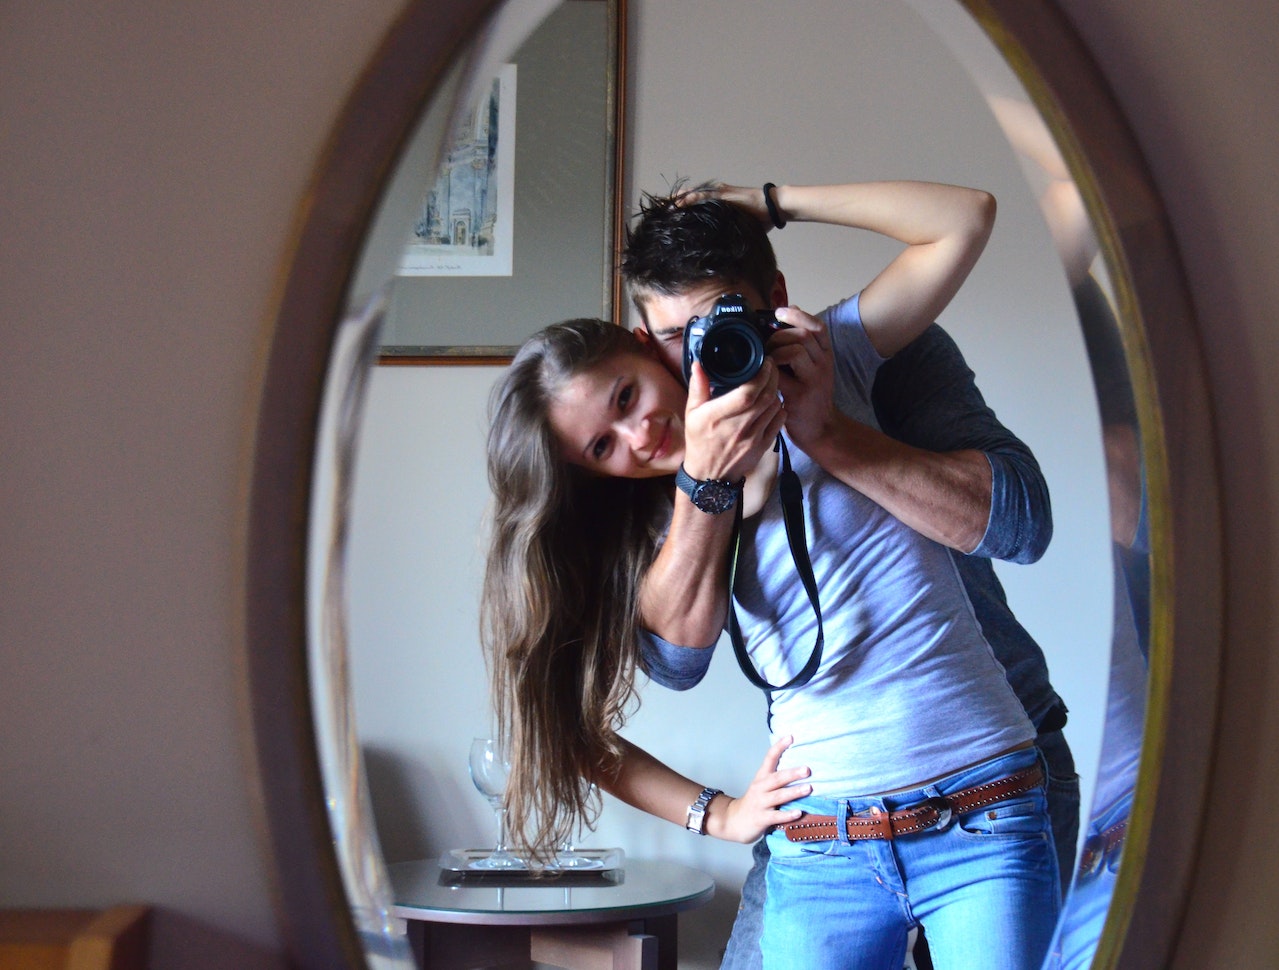 Man and Woman Taking Photo in Front of Mirror